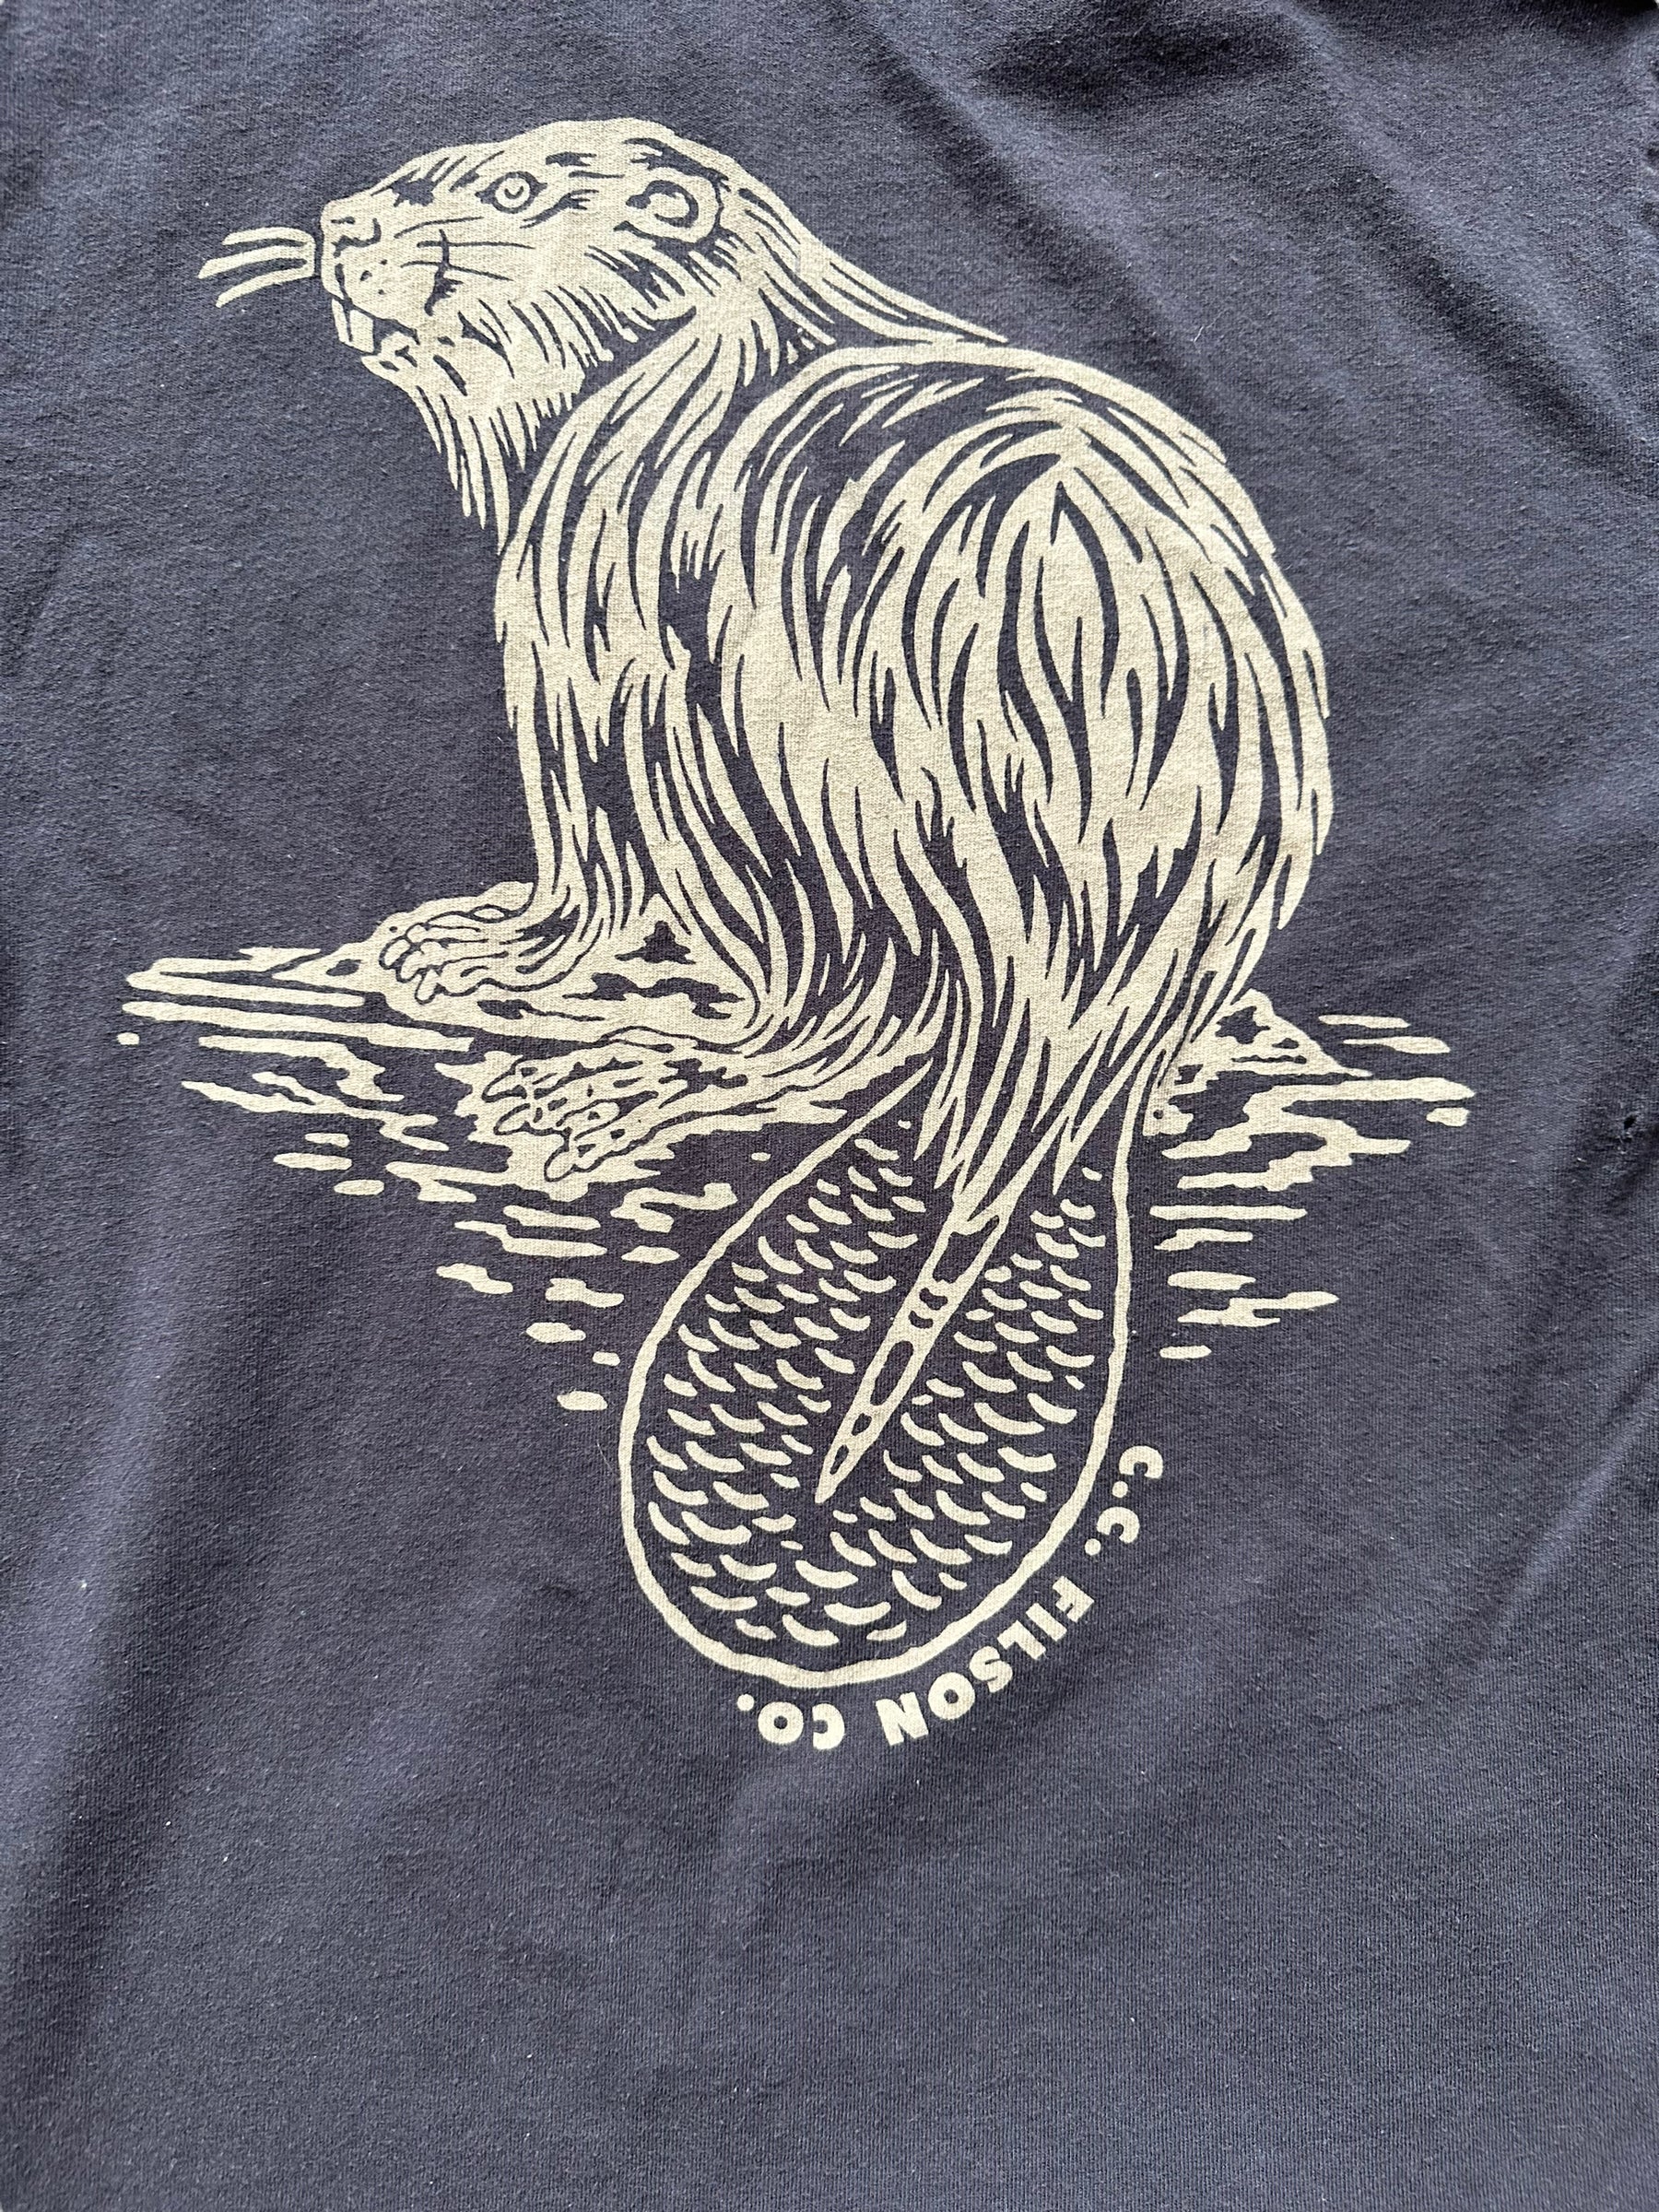 Close Up of Beaver Graphic on Rear of Filson Black Beaver Tee SZ XS  |  Barn Owl Vintage Goods | Filson Graphic Tees Seattle